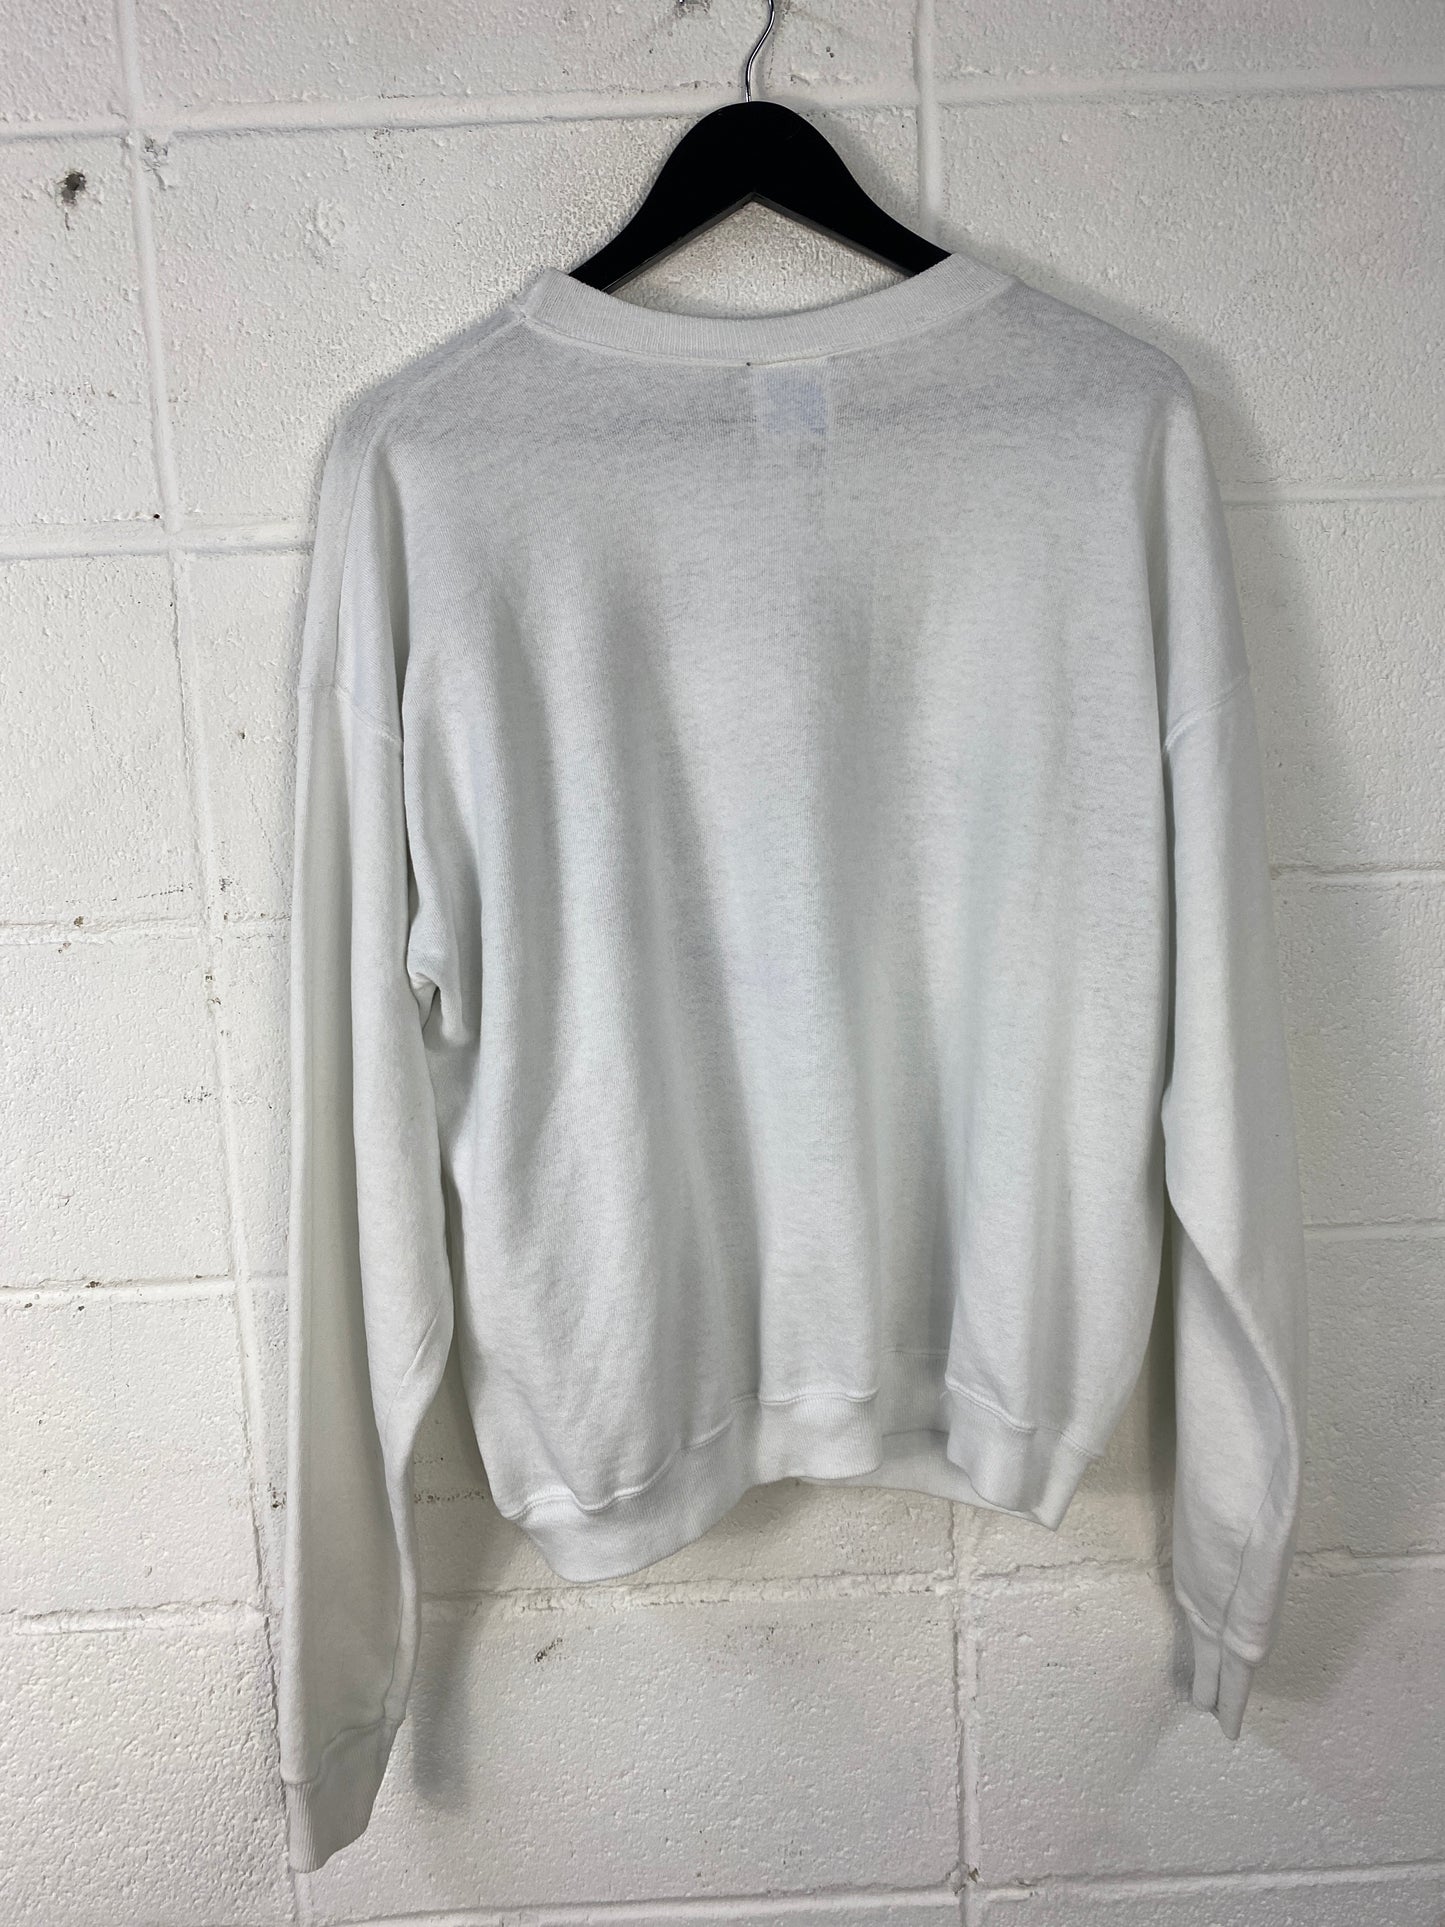 Load image into Gallery viewer, VTG Built Seiko For Life Sweater Sz XL
